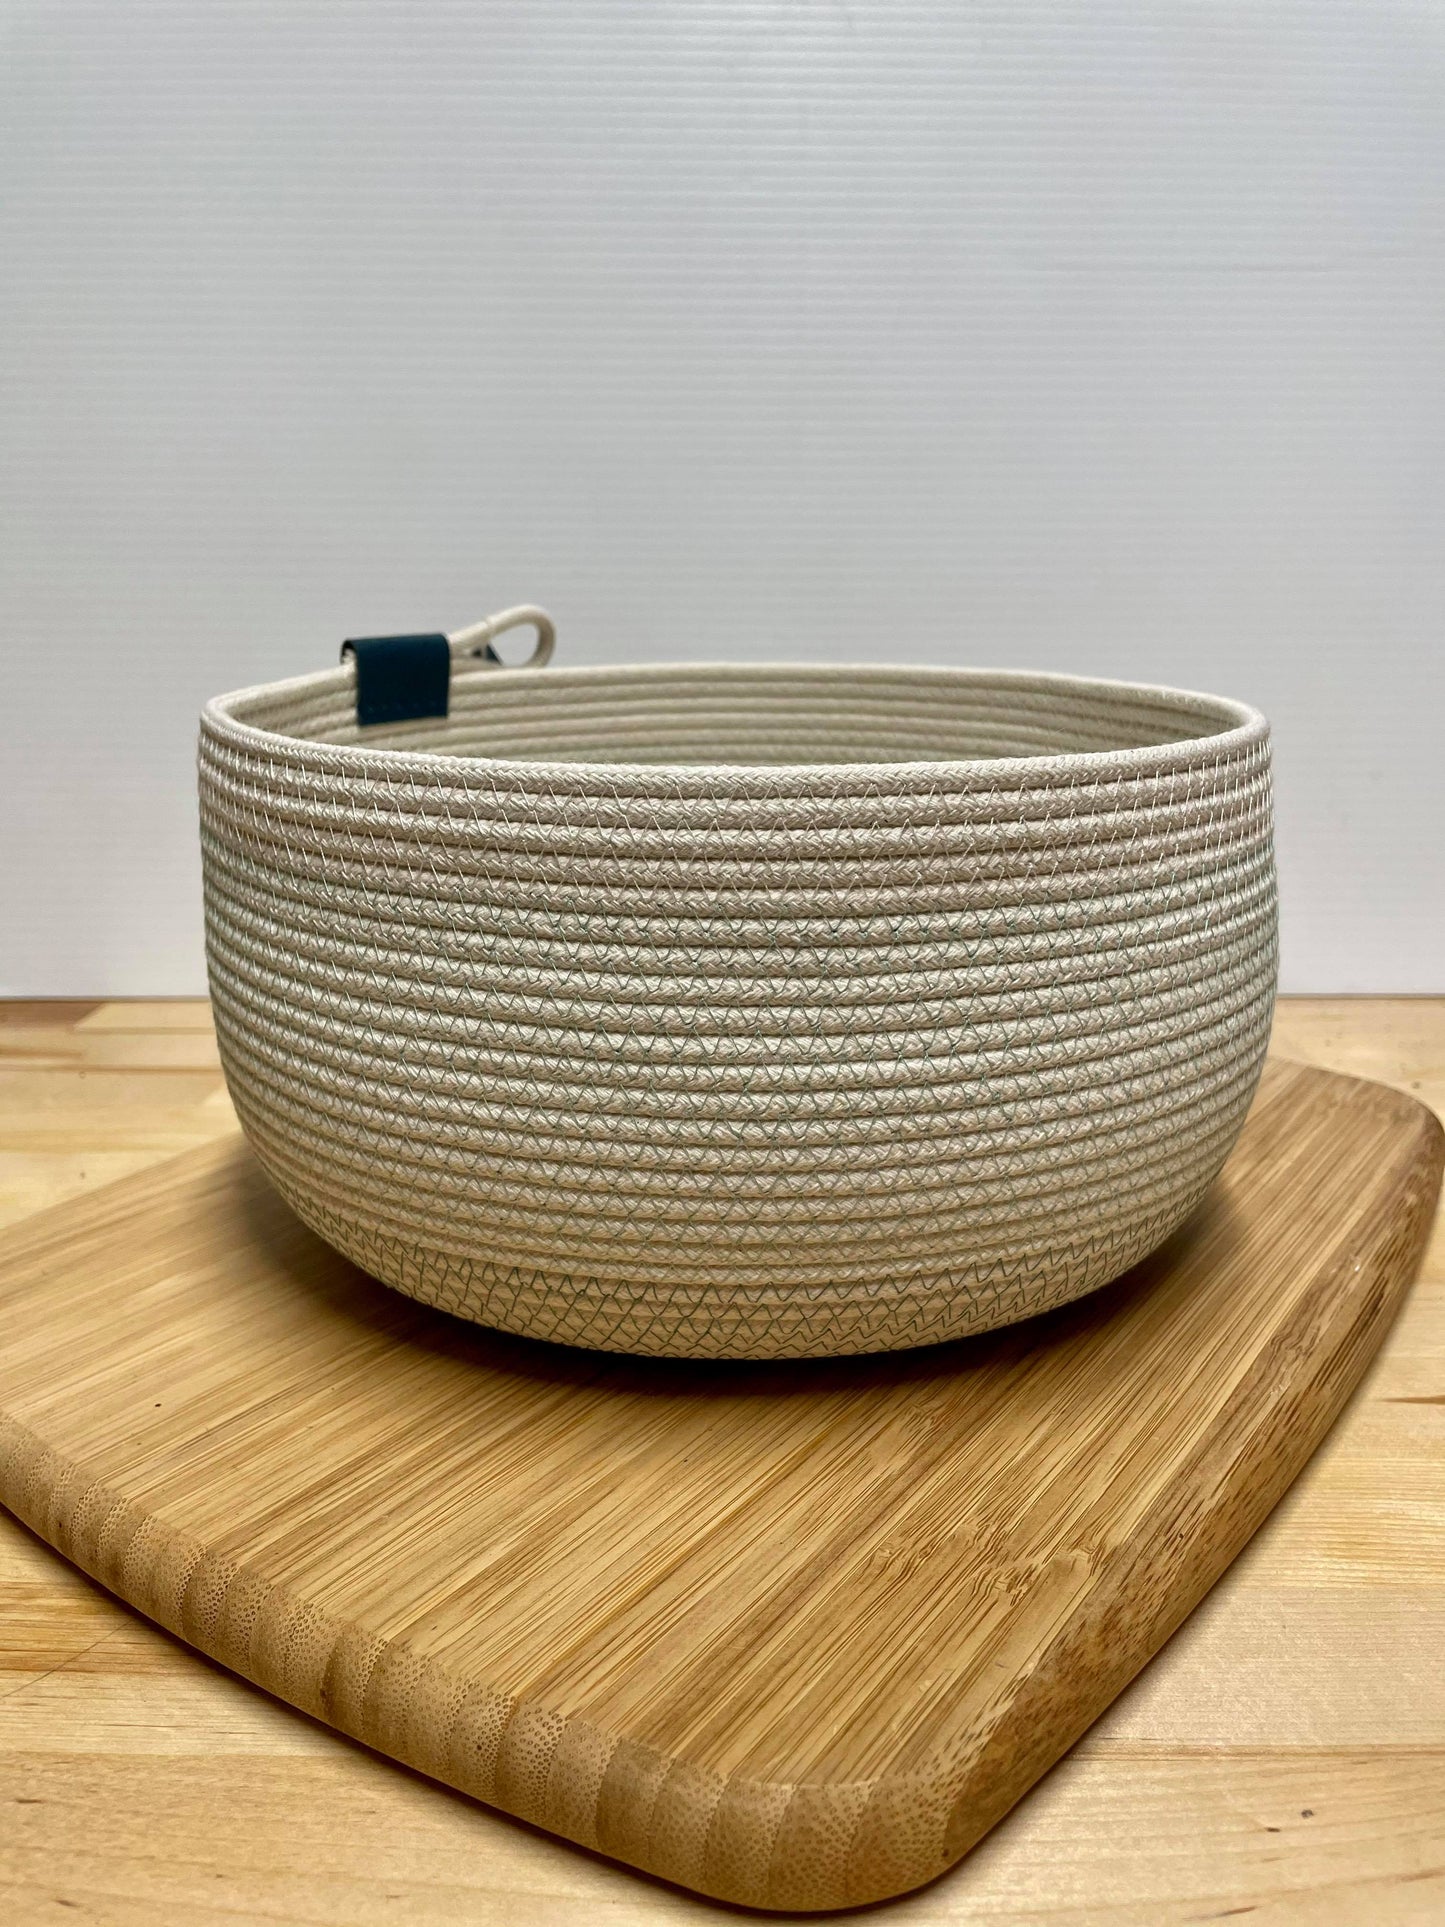 Ruby Rope Designs - Large Rope Bowls